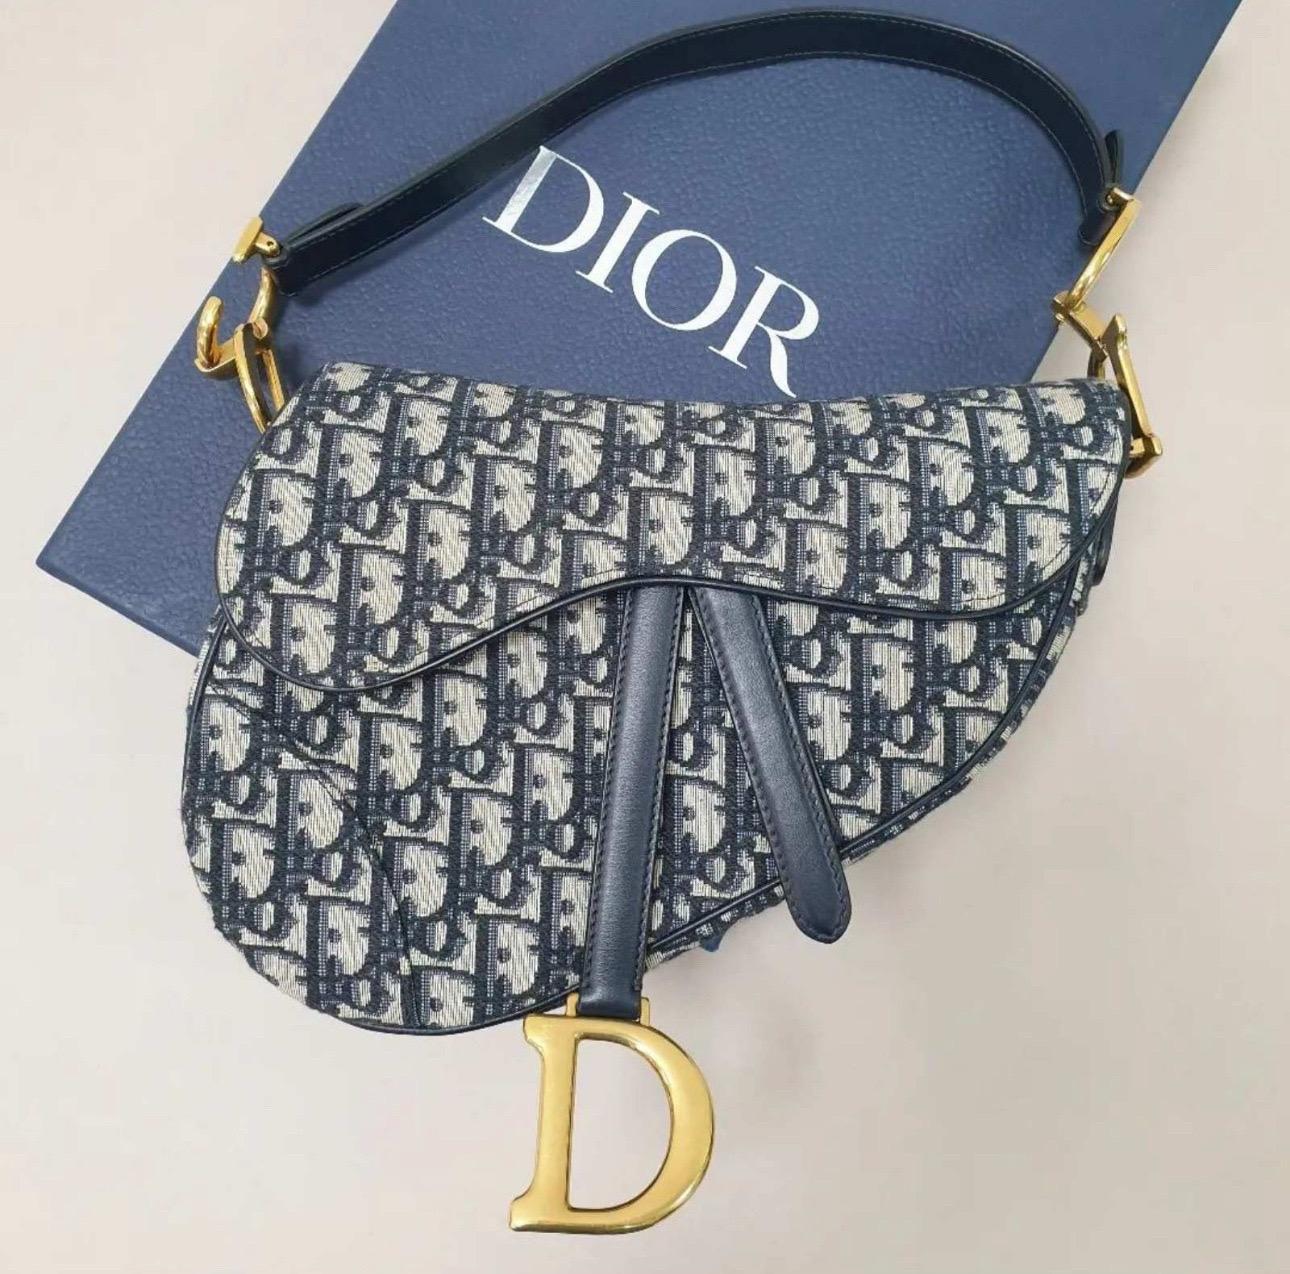 
    D stirrup strap and magnetic pull
    CD signature on the handle
    Thin, adjustable and removable shoulder strap
    Interior pocket
    Back pocket



Dimensions: 25.5 x 20 x 6.5 cm / 10 x 8 x 2.5 inches (Length x Height x Width)

Condition